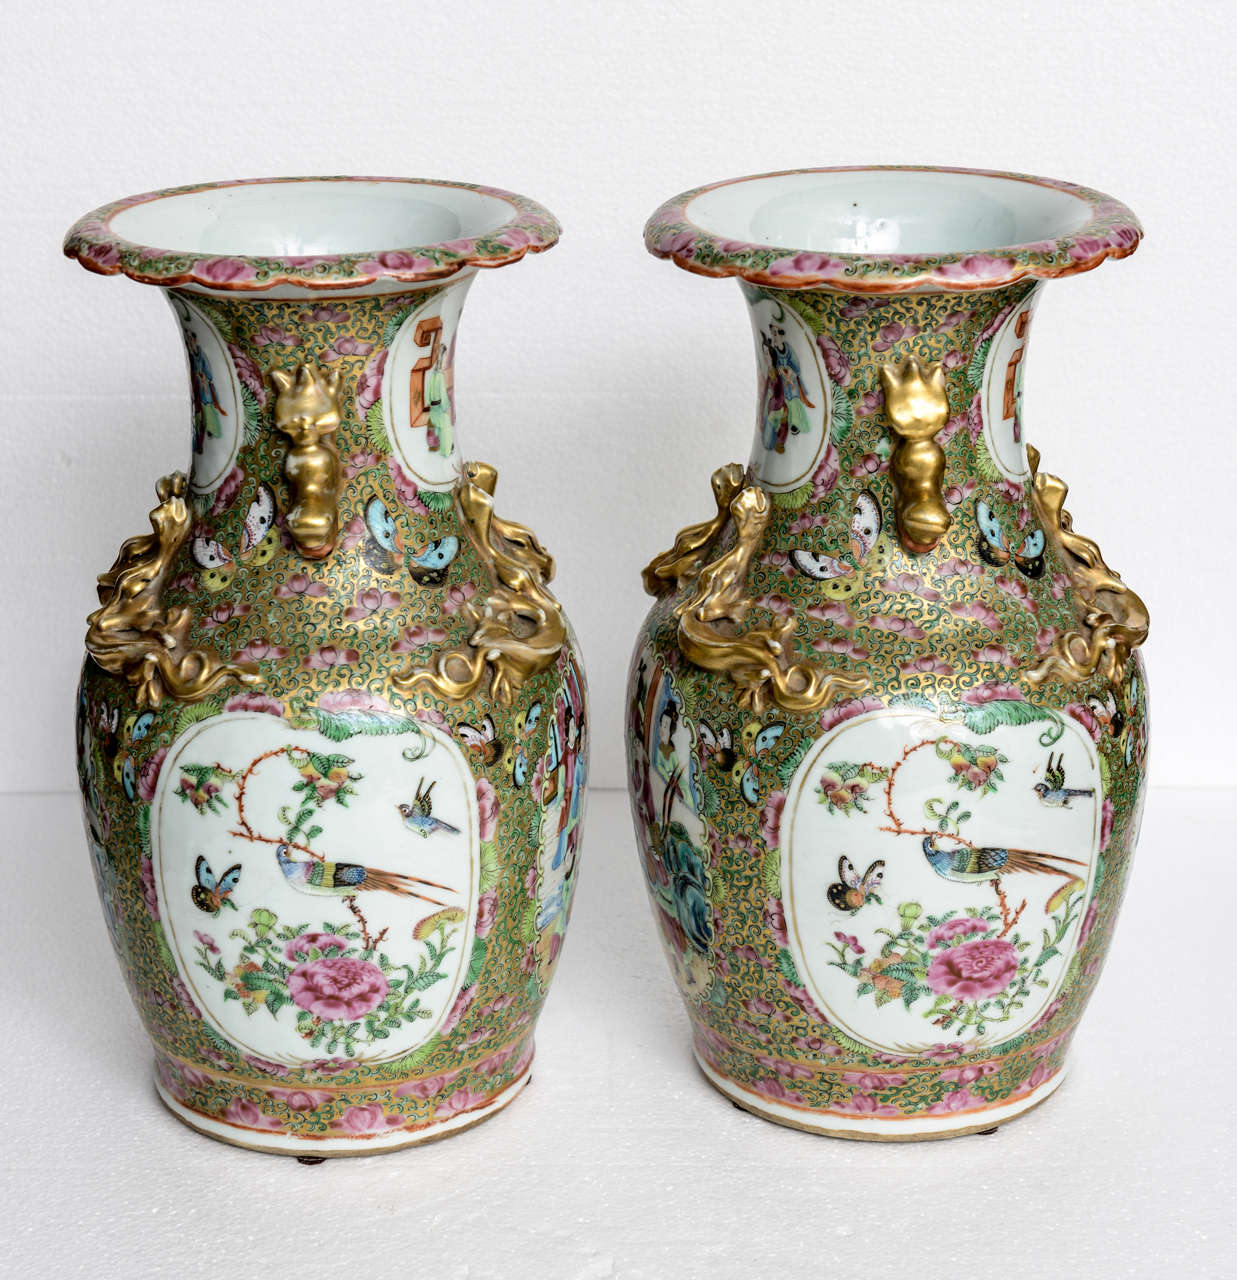 Rare Pair of Chinese Porcelain Famille Rose Vases, 19th Century For Sale 1